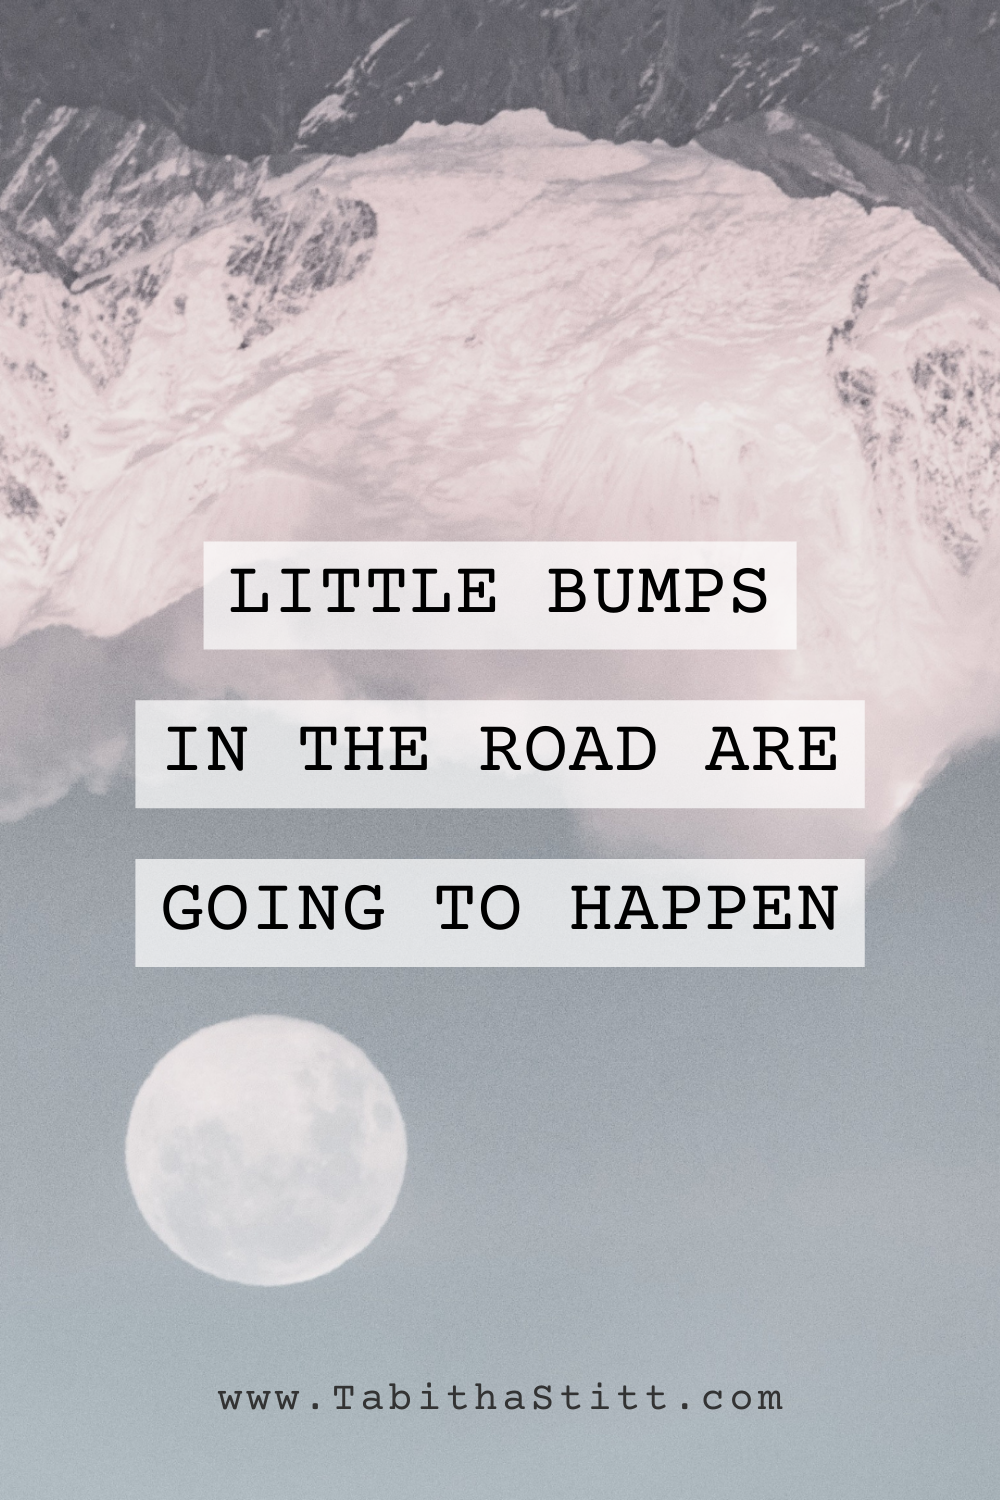 When to Listen so You Easily Find and Discover Your Calling : Little Bumps in the Road Are Going to Happen from The Blog Tabitha Stitt The Self-Help Psychic, showing a moon for illumination and hope